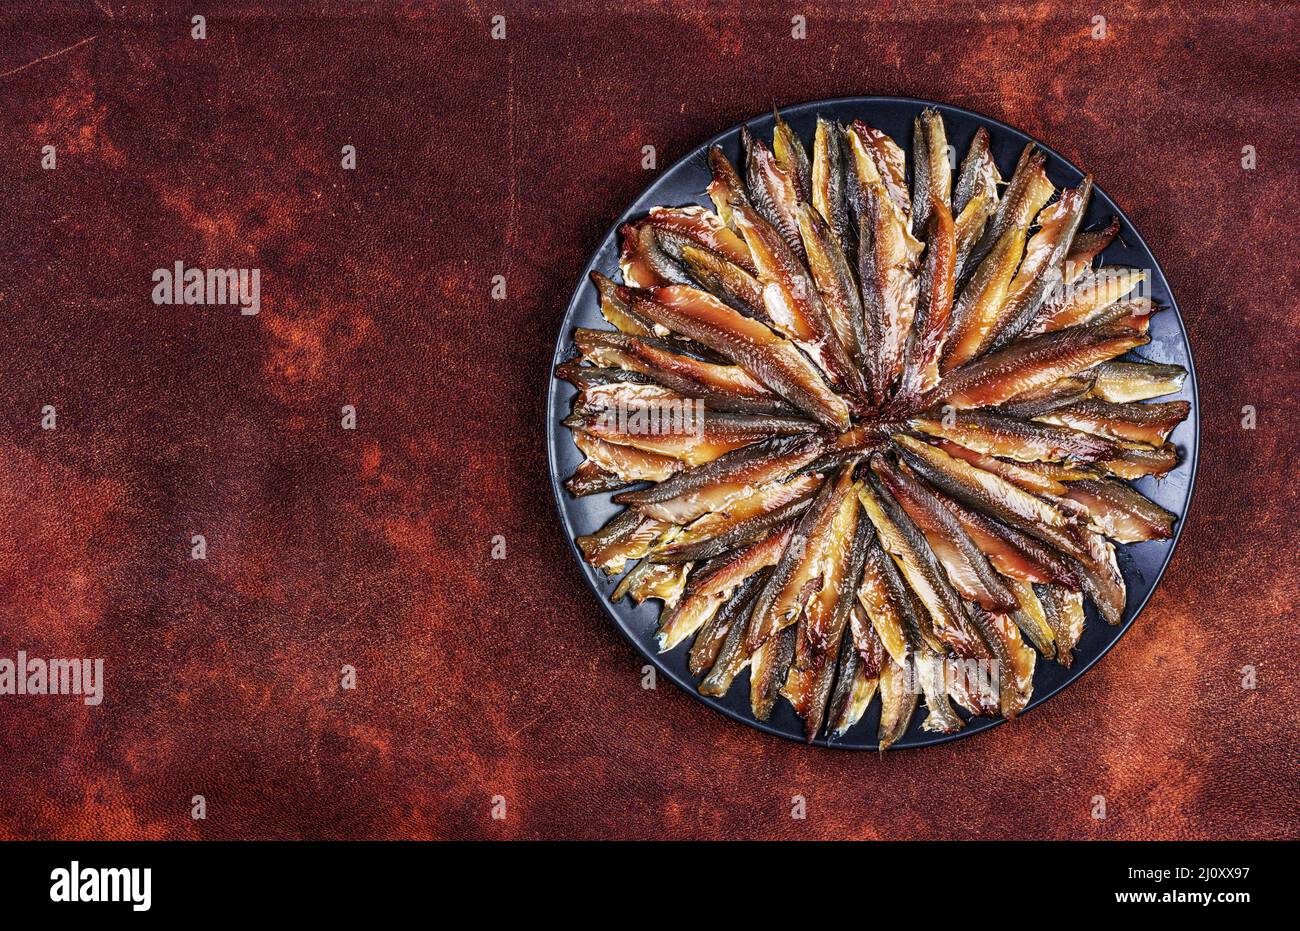 European anchovy fish fillet in a black plate on a red brown leather background top view Stock Photo